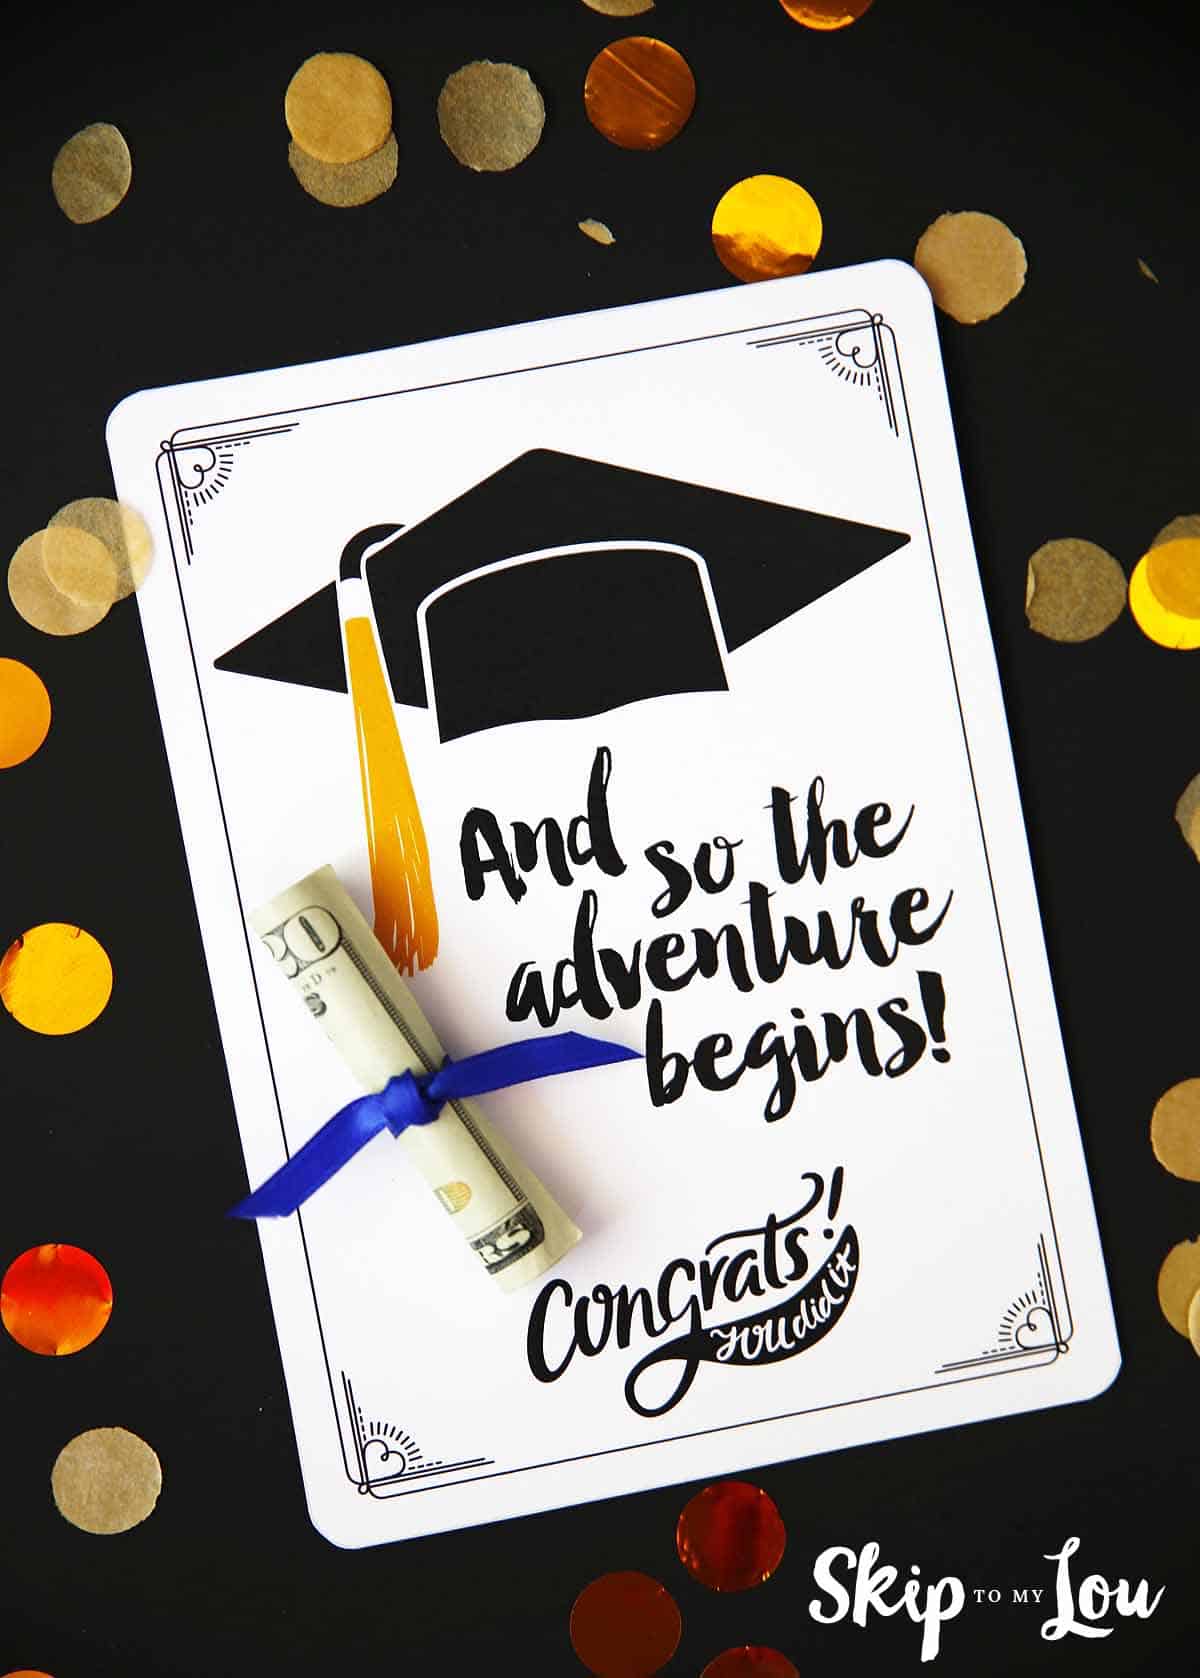 Free Graduation Cards with Positive Quotes and CASH!